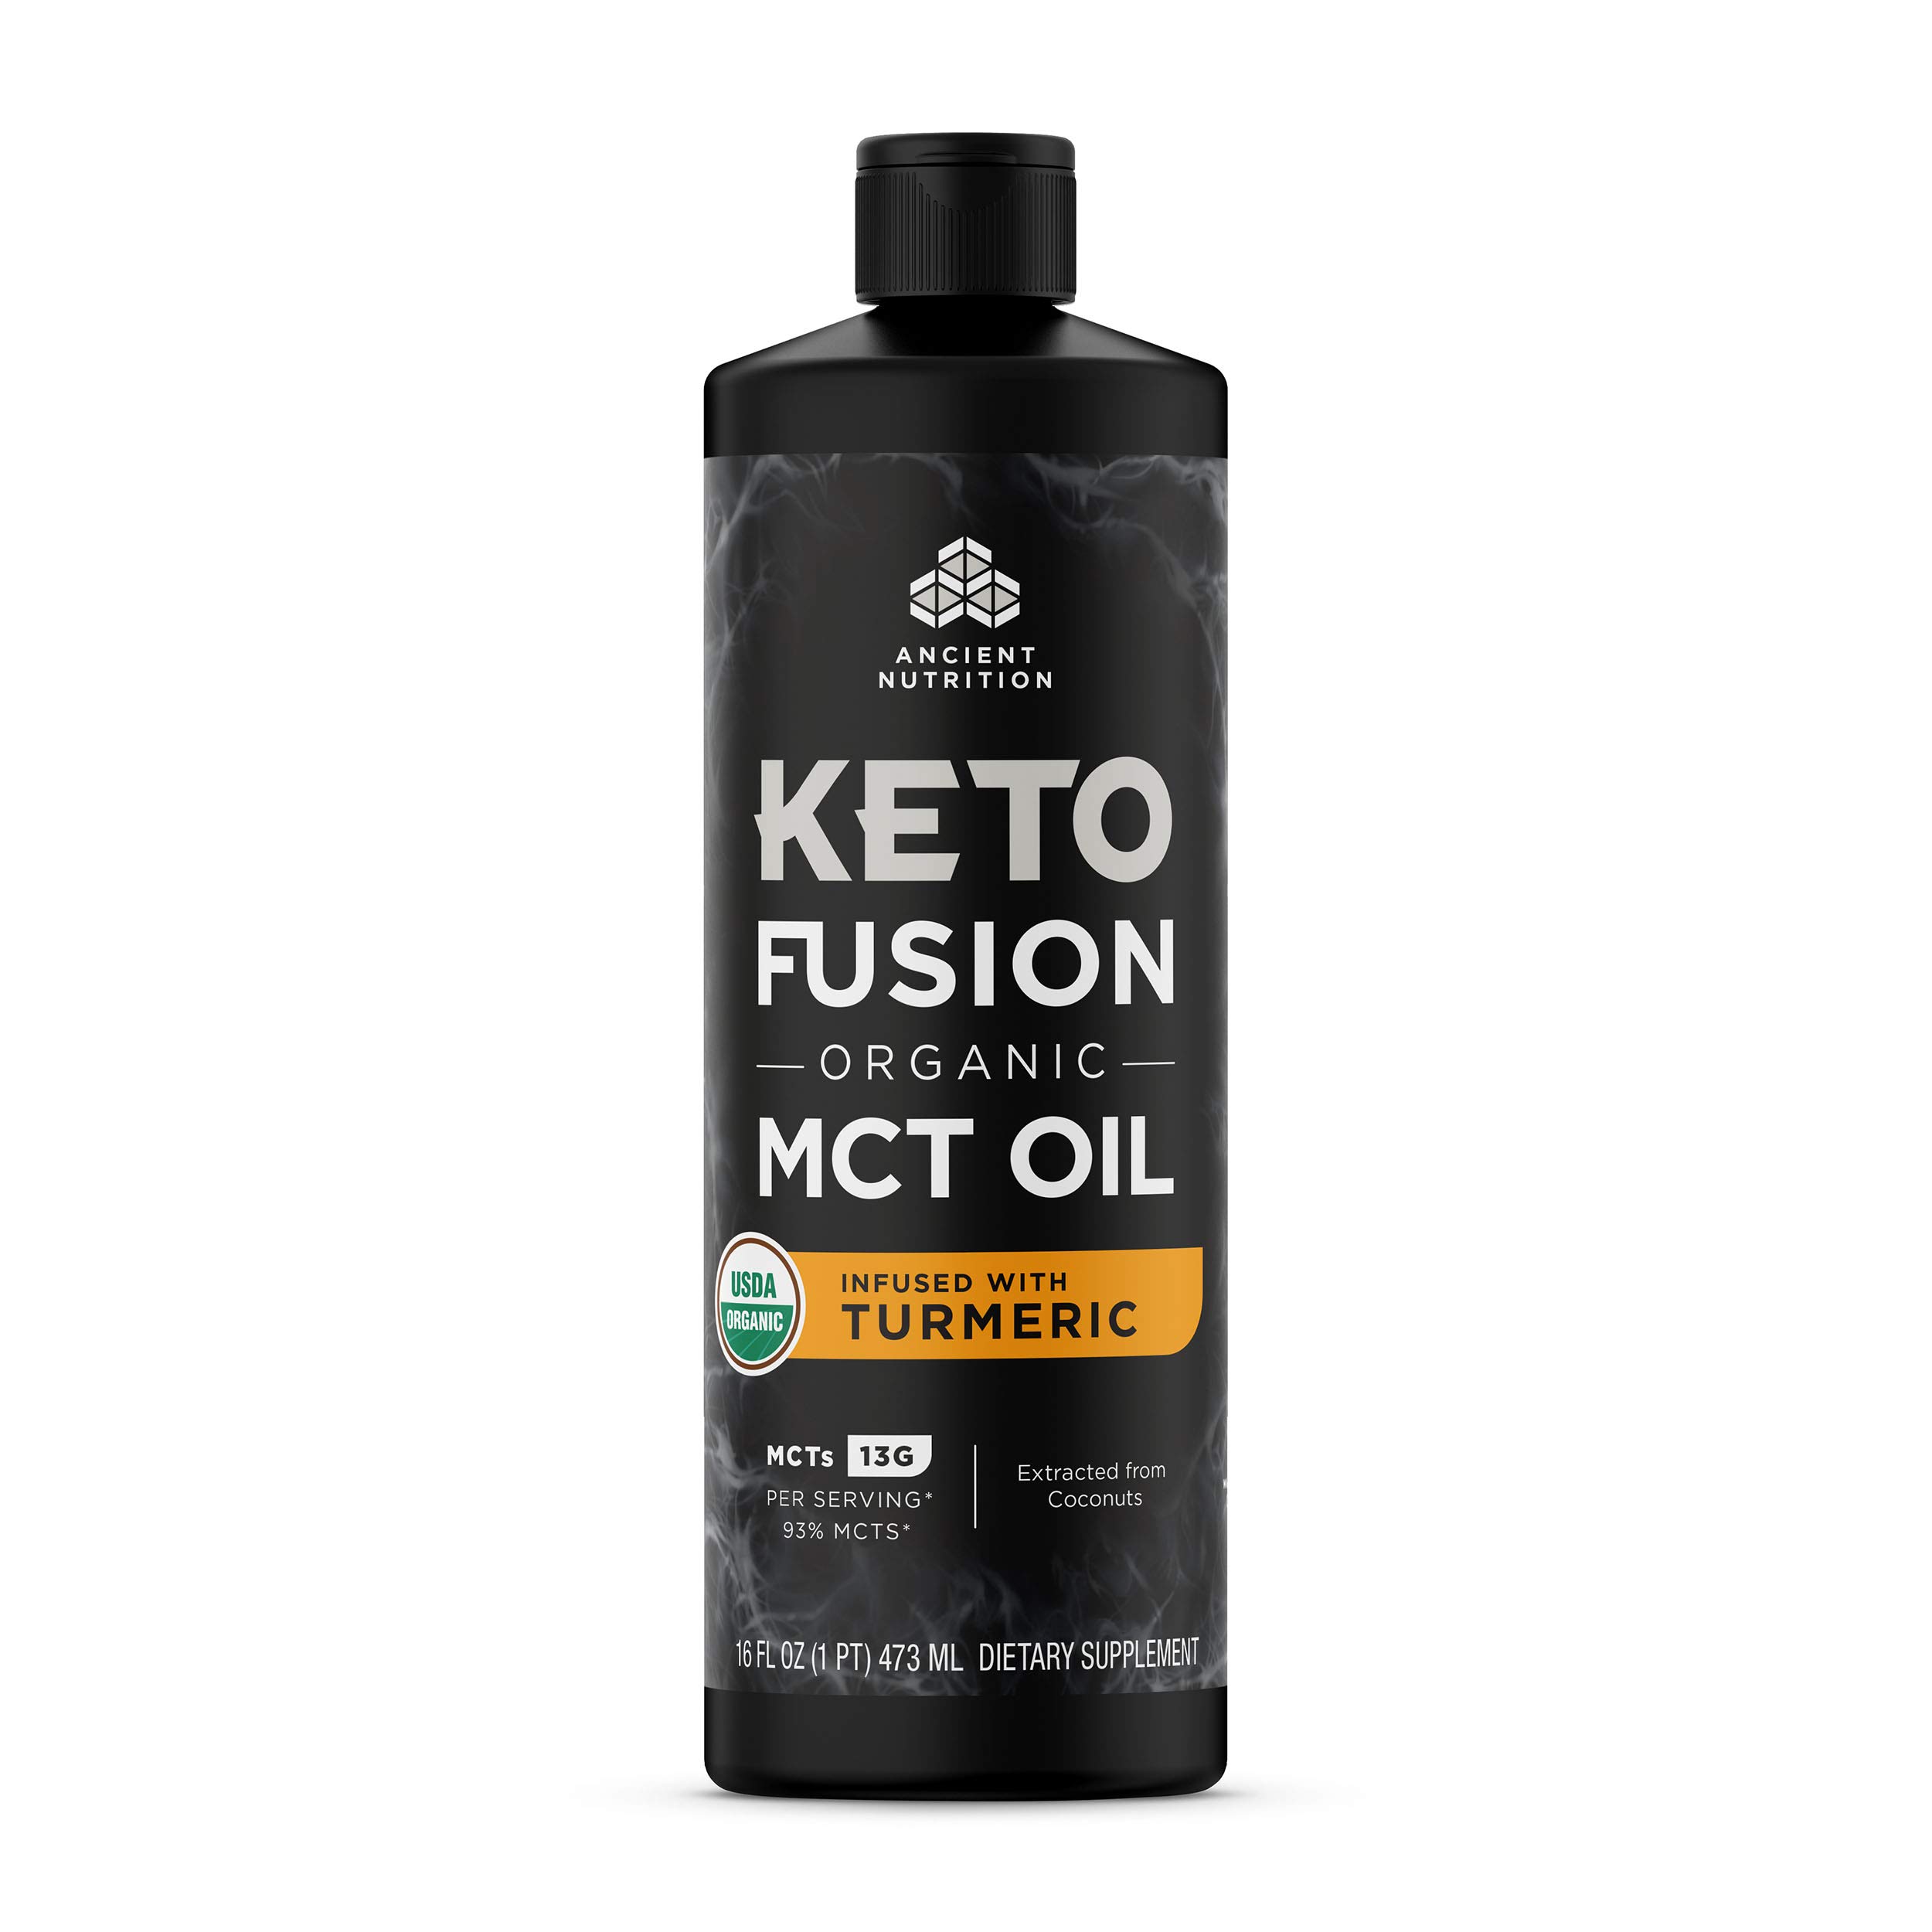 Dr. Axe / Ancient Nutrition Keto Fusion Organic MCT Oil Infused with  Turmeric 16 fl oz (473 ml)